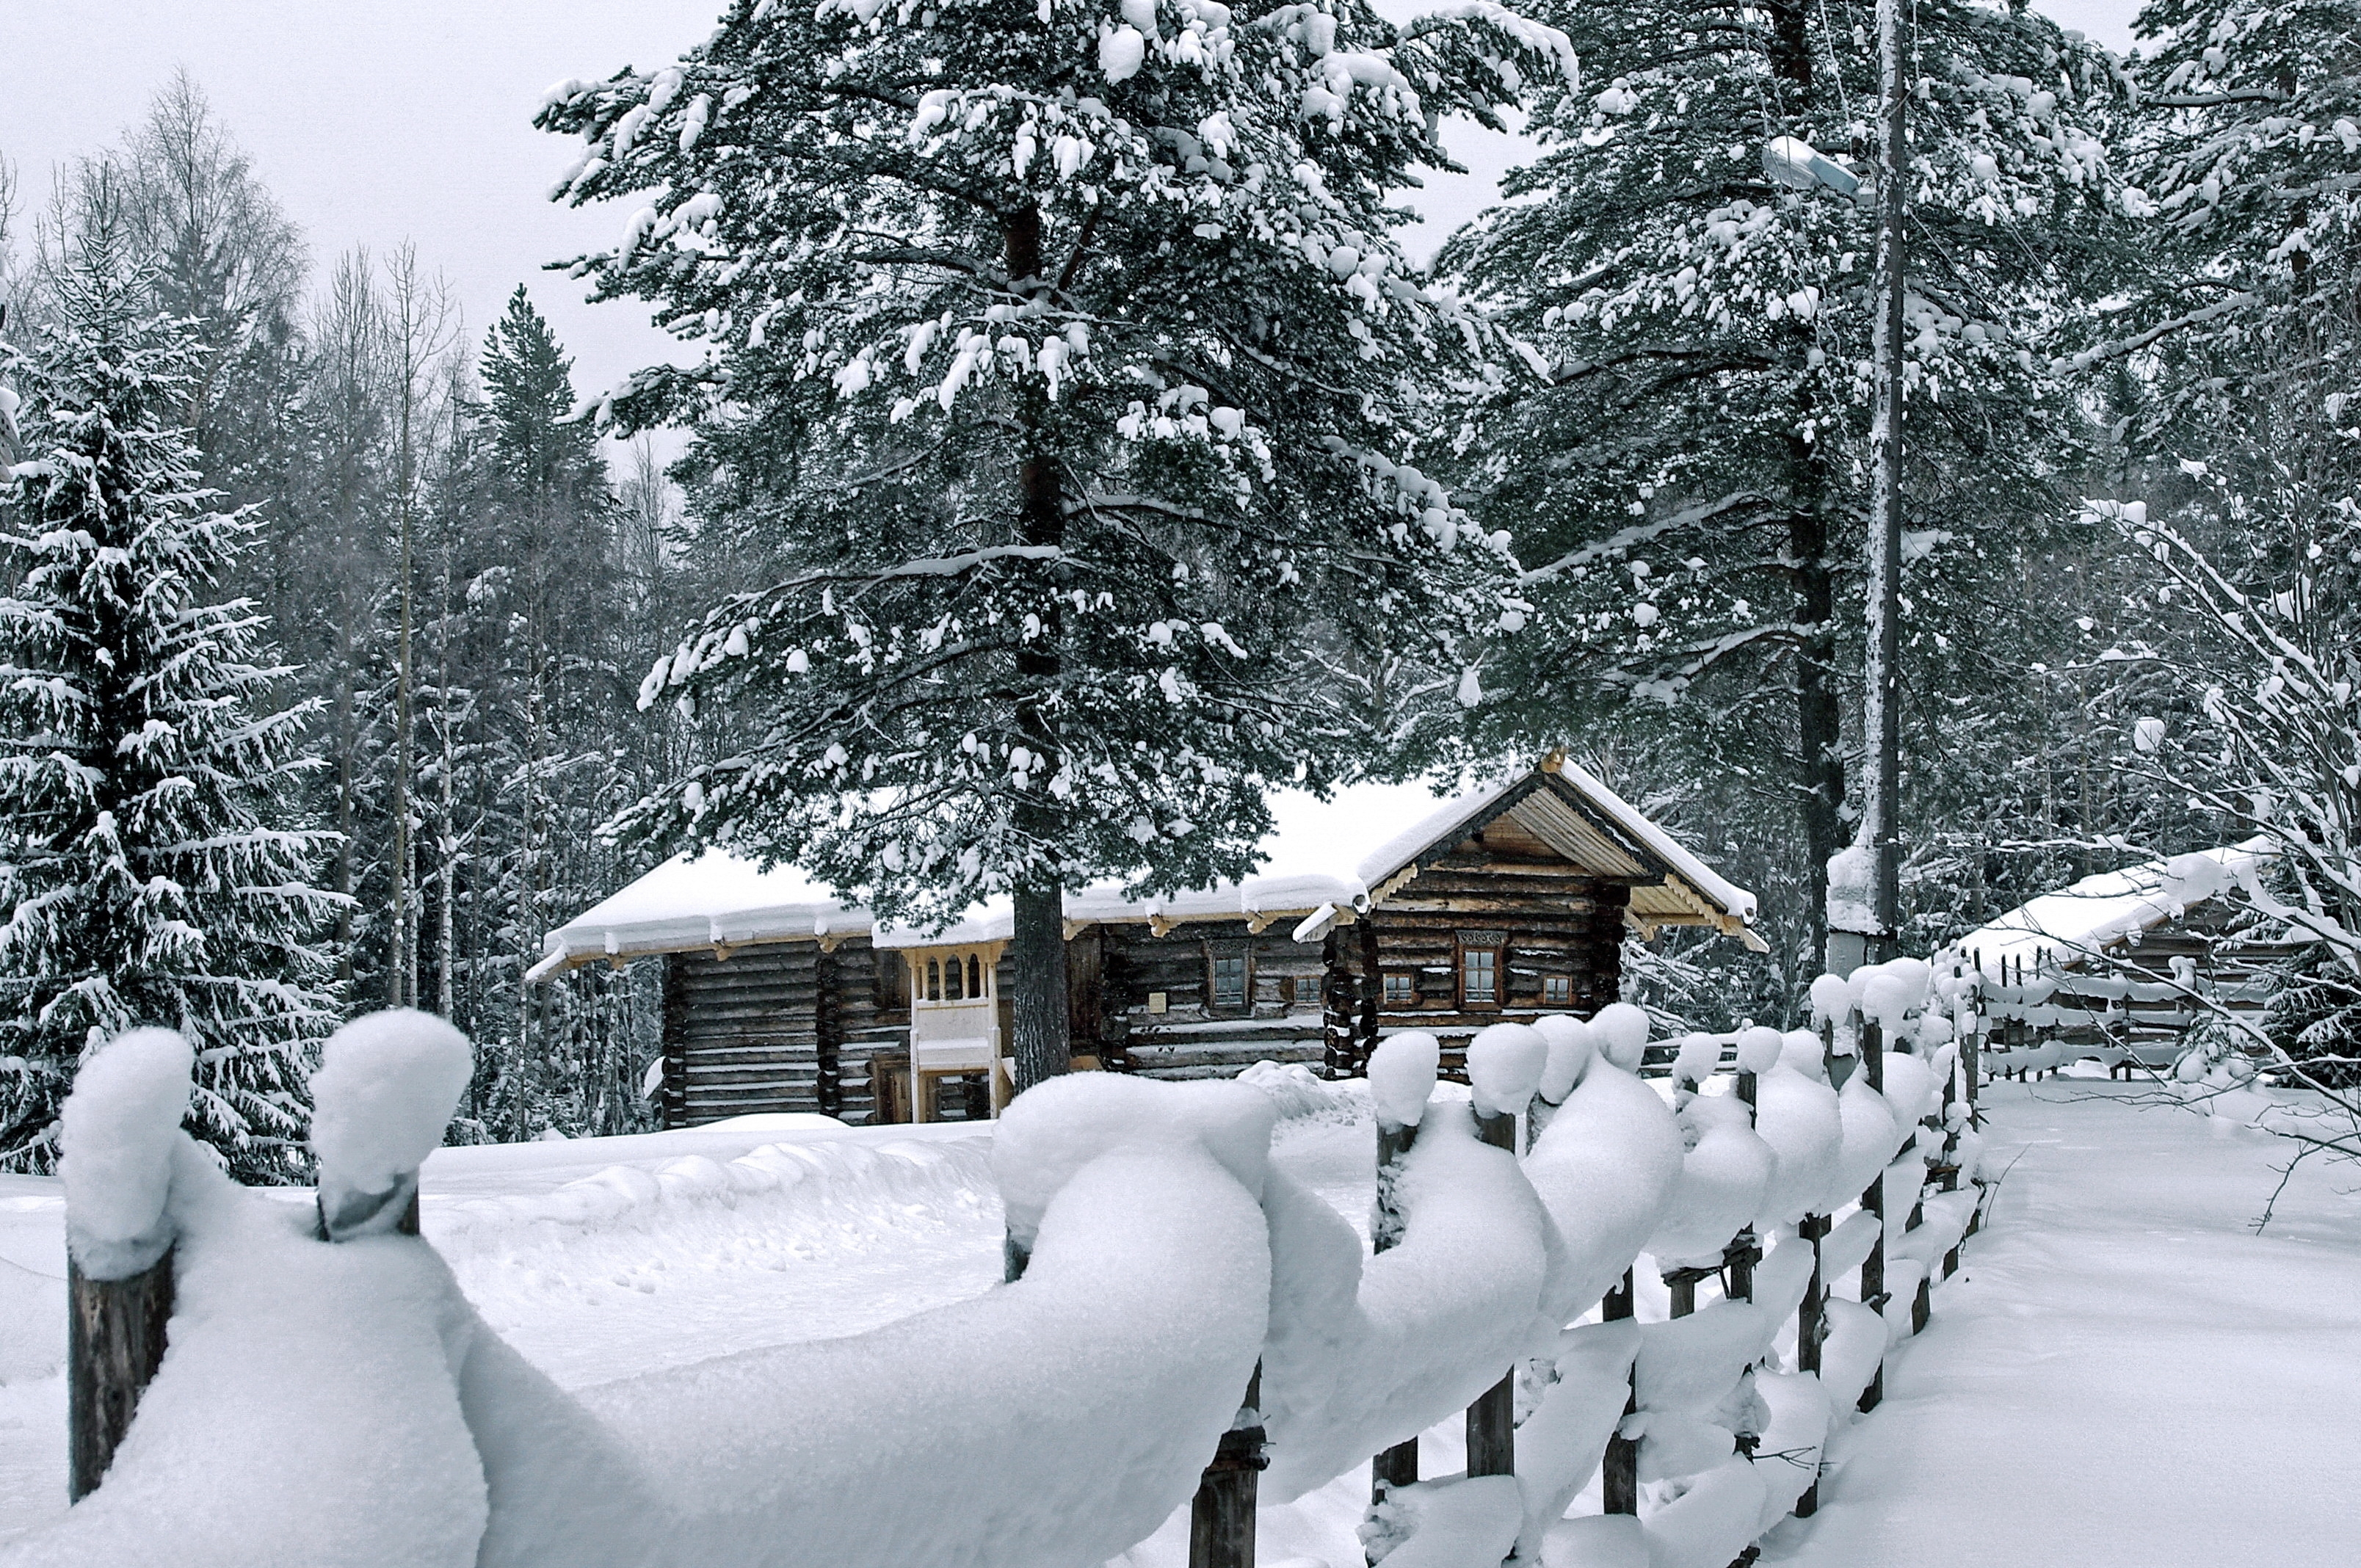 Download PC Wallpaper building, nature, pine, snow, house, fence, construction, drifts, izba, robe, garb